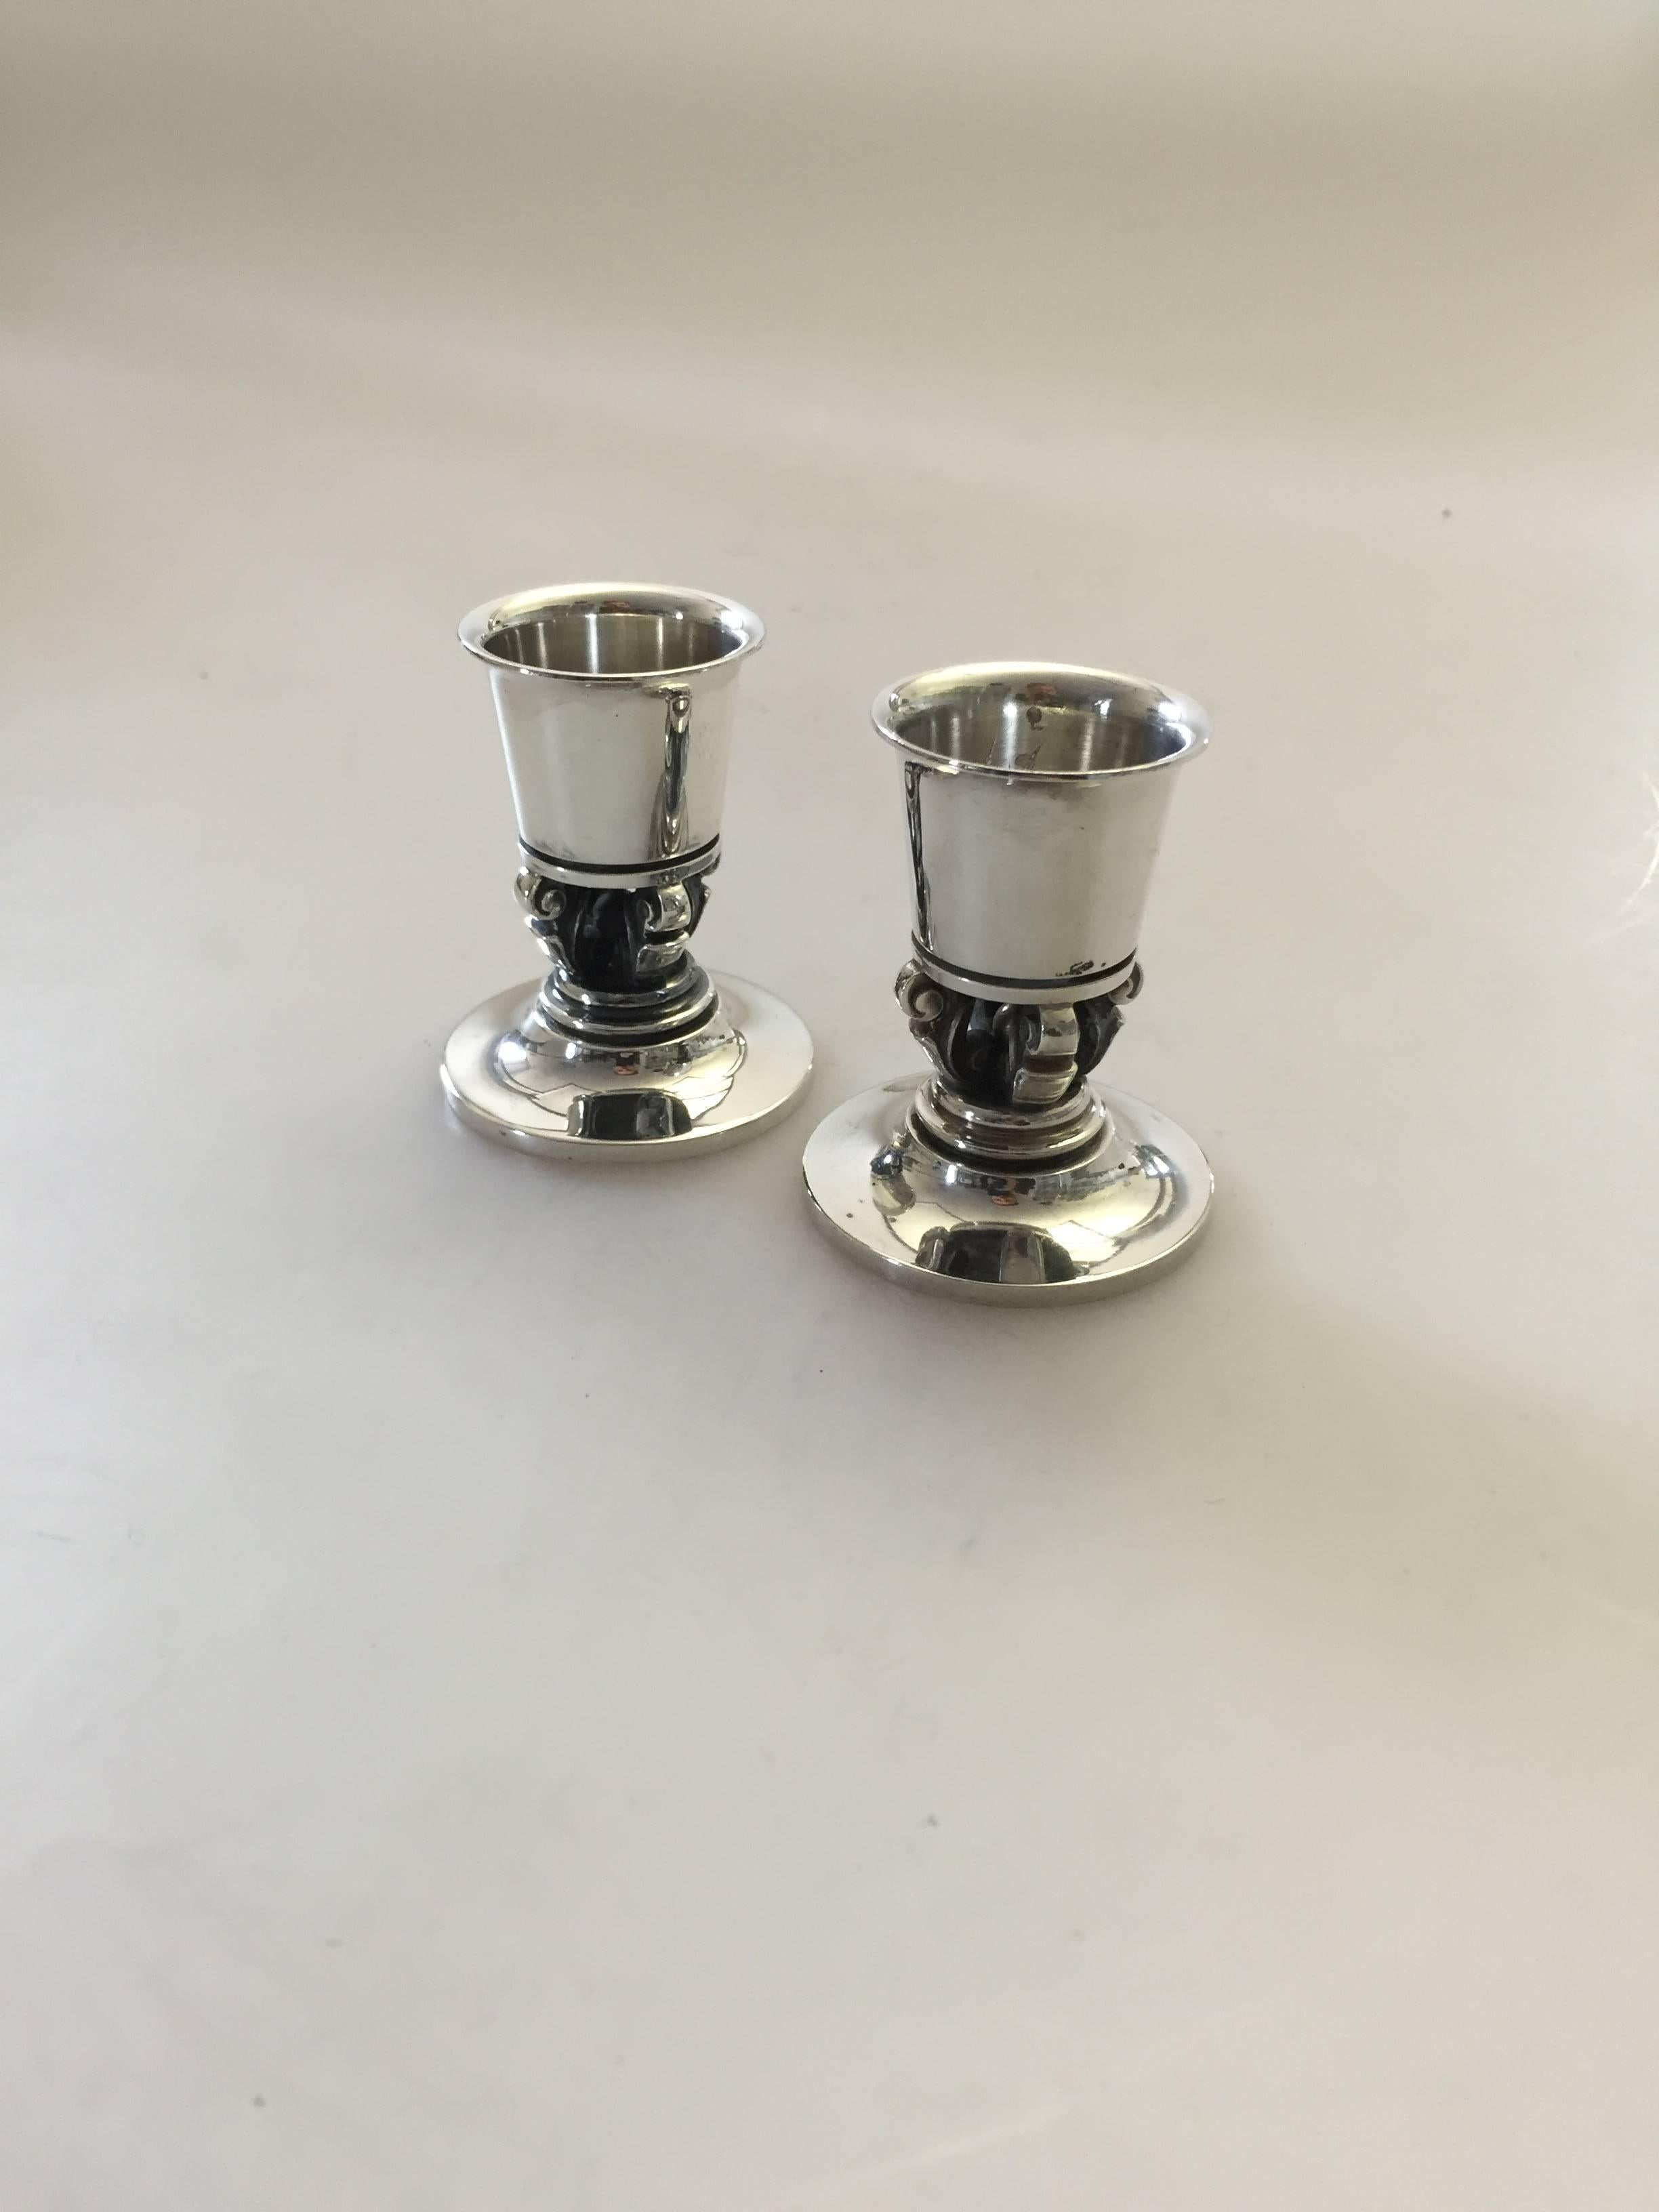 Georg Jensen sterling silver pair of acorn candlesticks #741. The candlesticks are 5.3 cm high and in a good condition. We have several pairs in stock most of them with old marks. 

Georg Jensen (1866-1935) opened his small silver atelier in